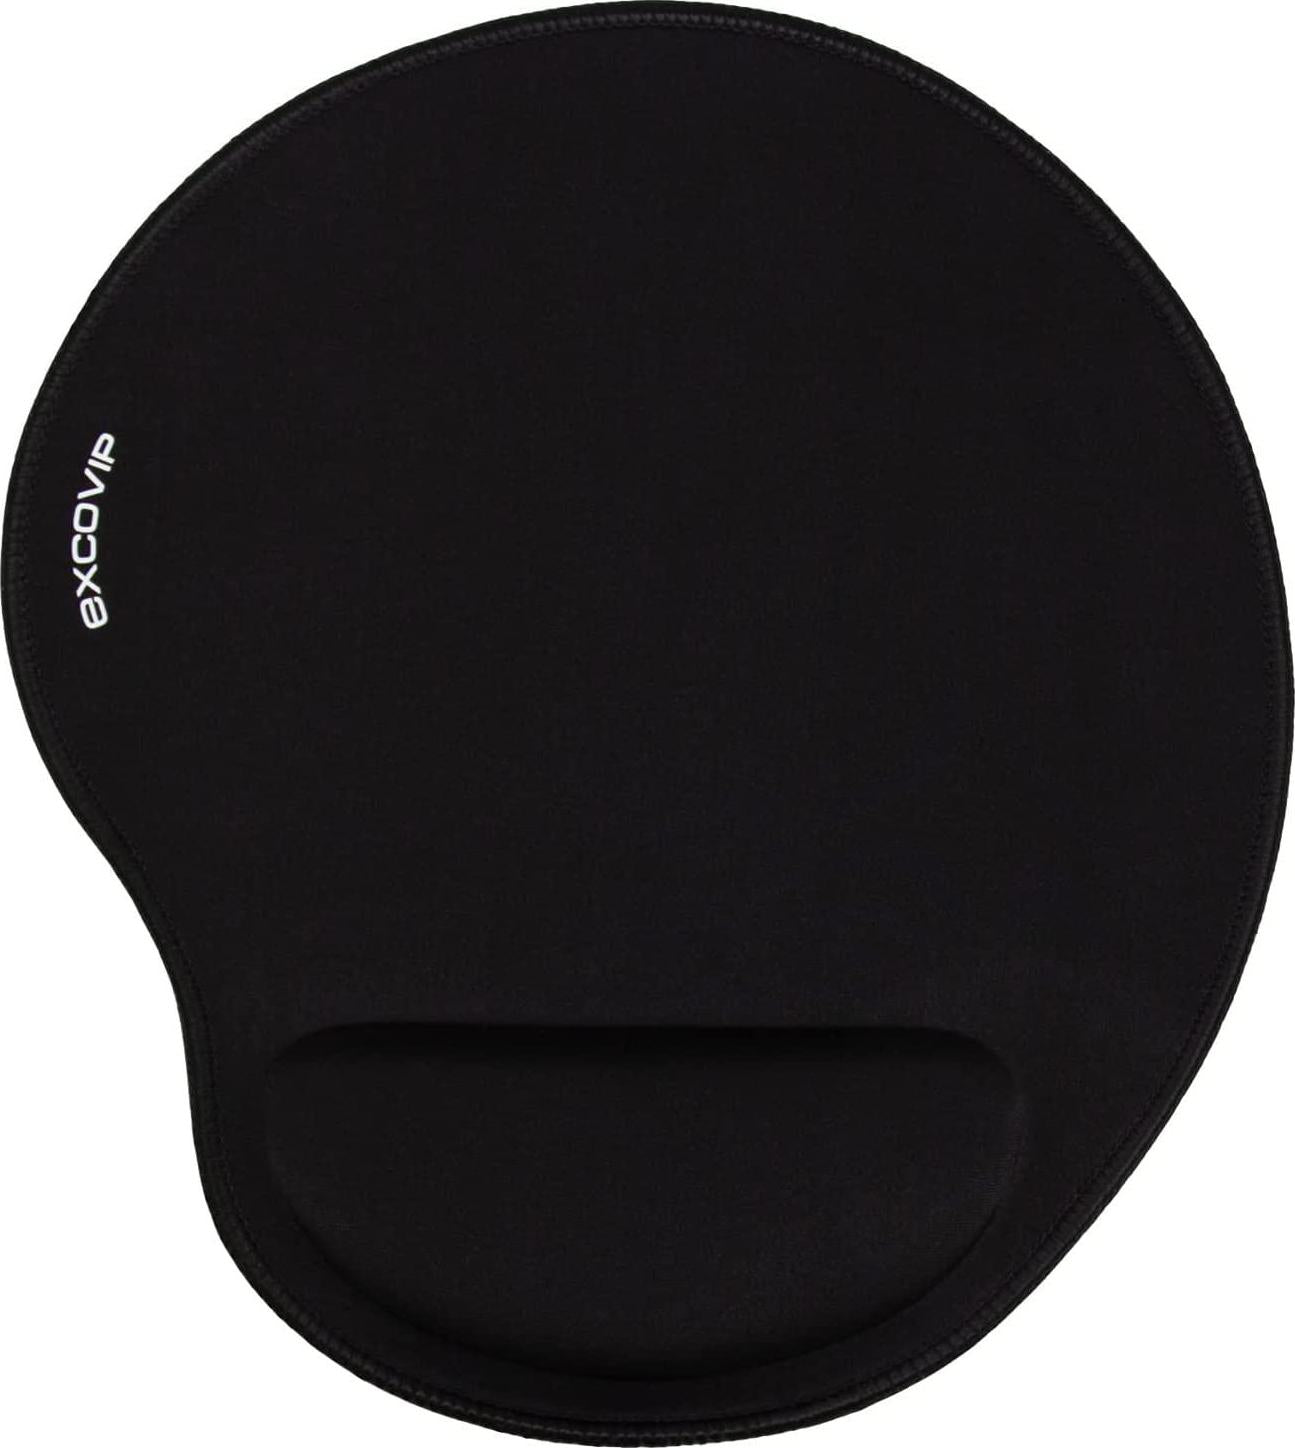 excovip, Ergonomic Stitched Edges Mouse Pad with Wrist Support -Excovip Smooth Surface Wrist Rest Mousepad, Black Mouse Mat with Non-Slip Rubber Base and Soft Memory Foam 9101